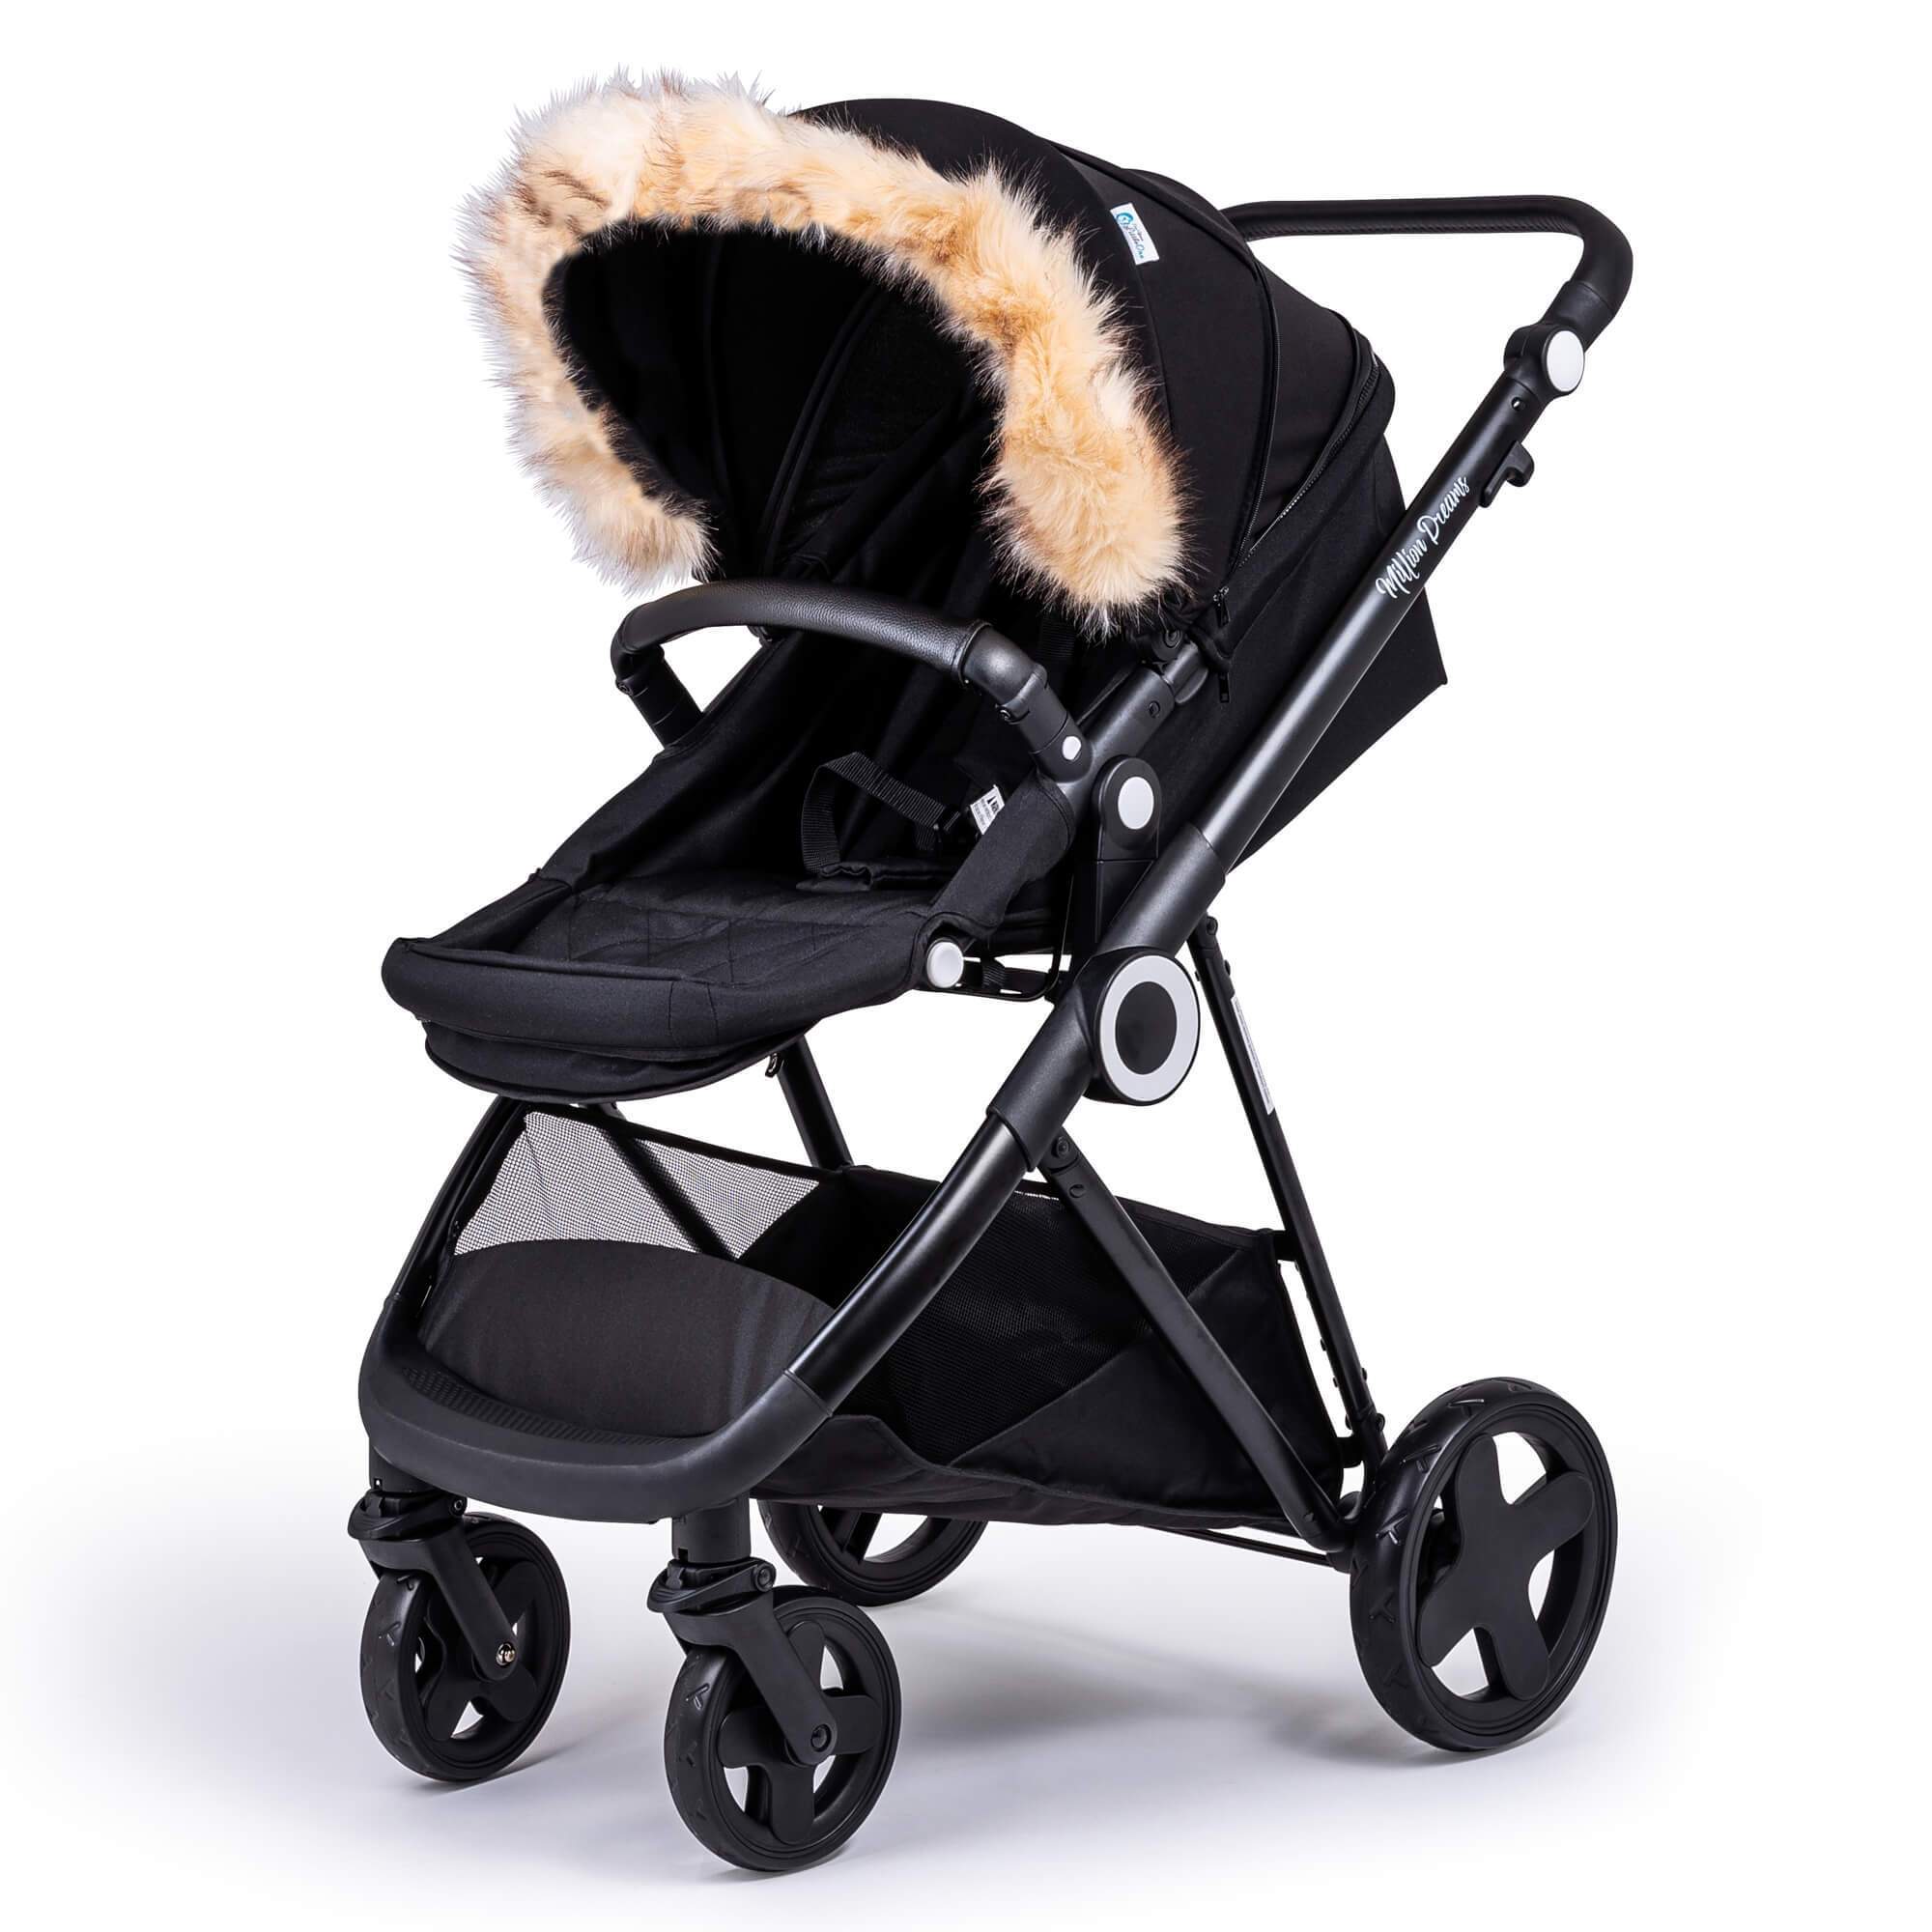 Pram Fur Hood Trim Attachment for Pushchair Compatible with Nania - For Your Little One